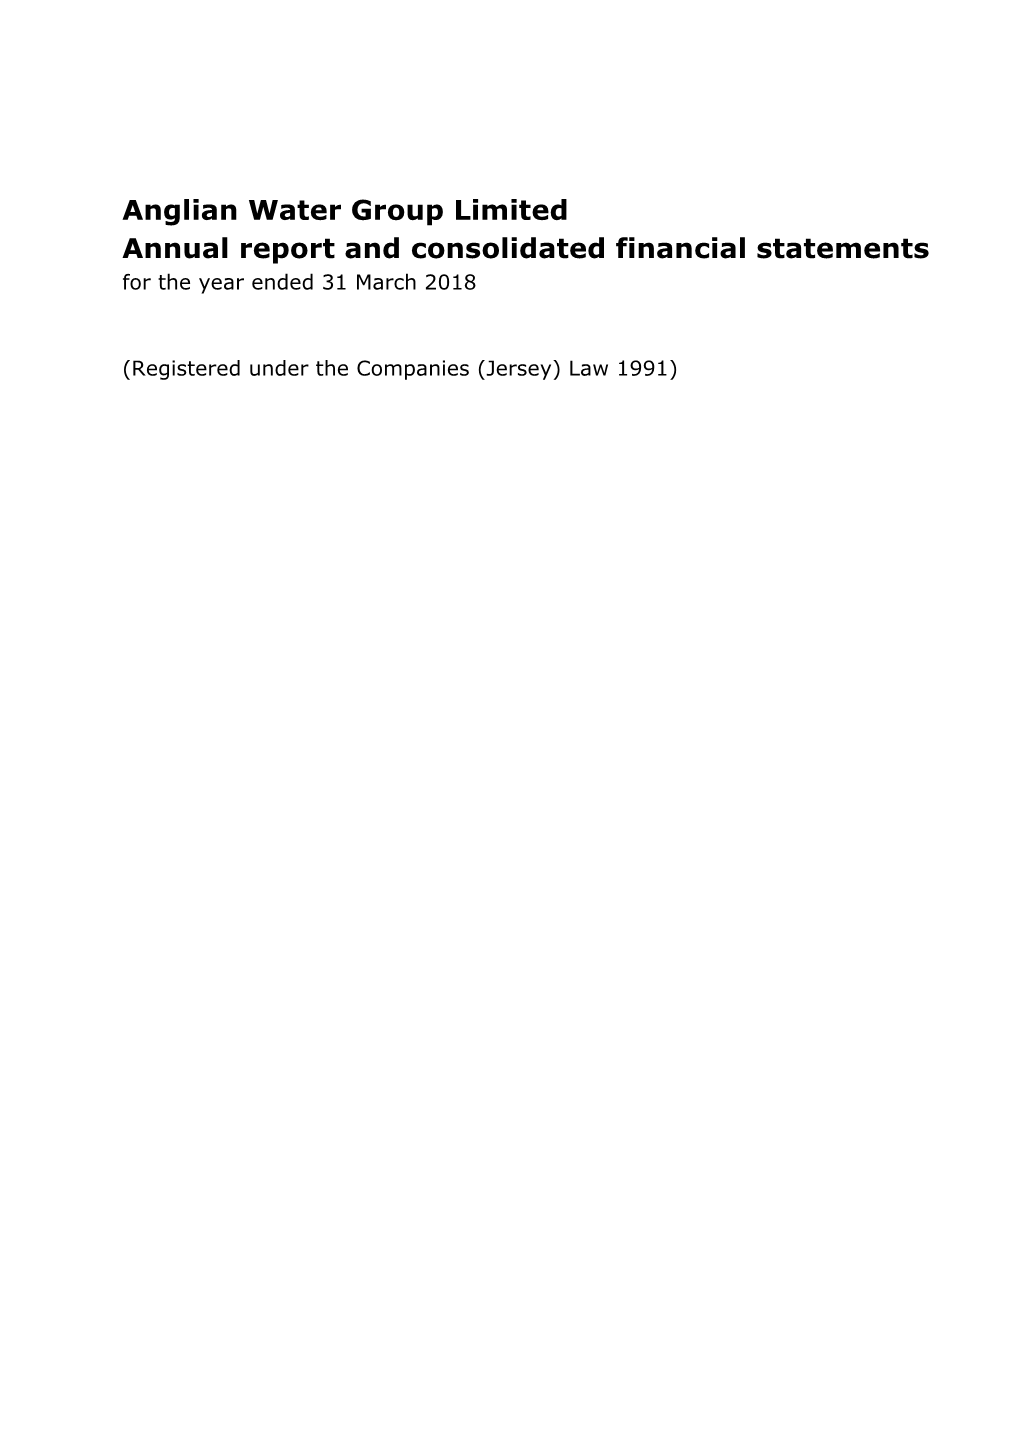 Anglian Water Group Limited Annual Report and Consolidated Financial Statements for the Year Ended 31 March 2018